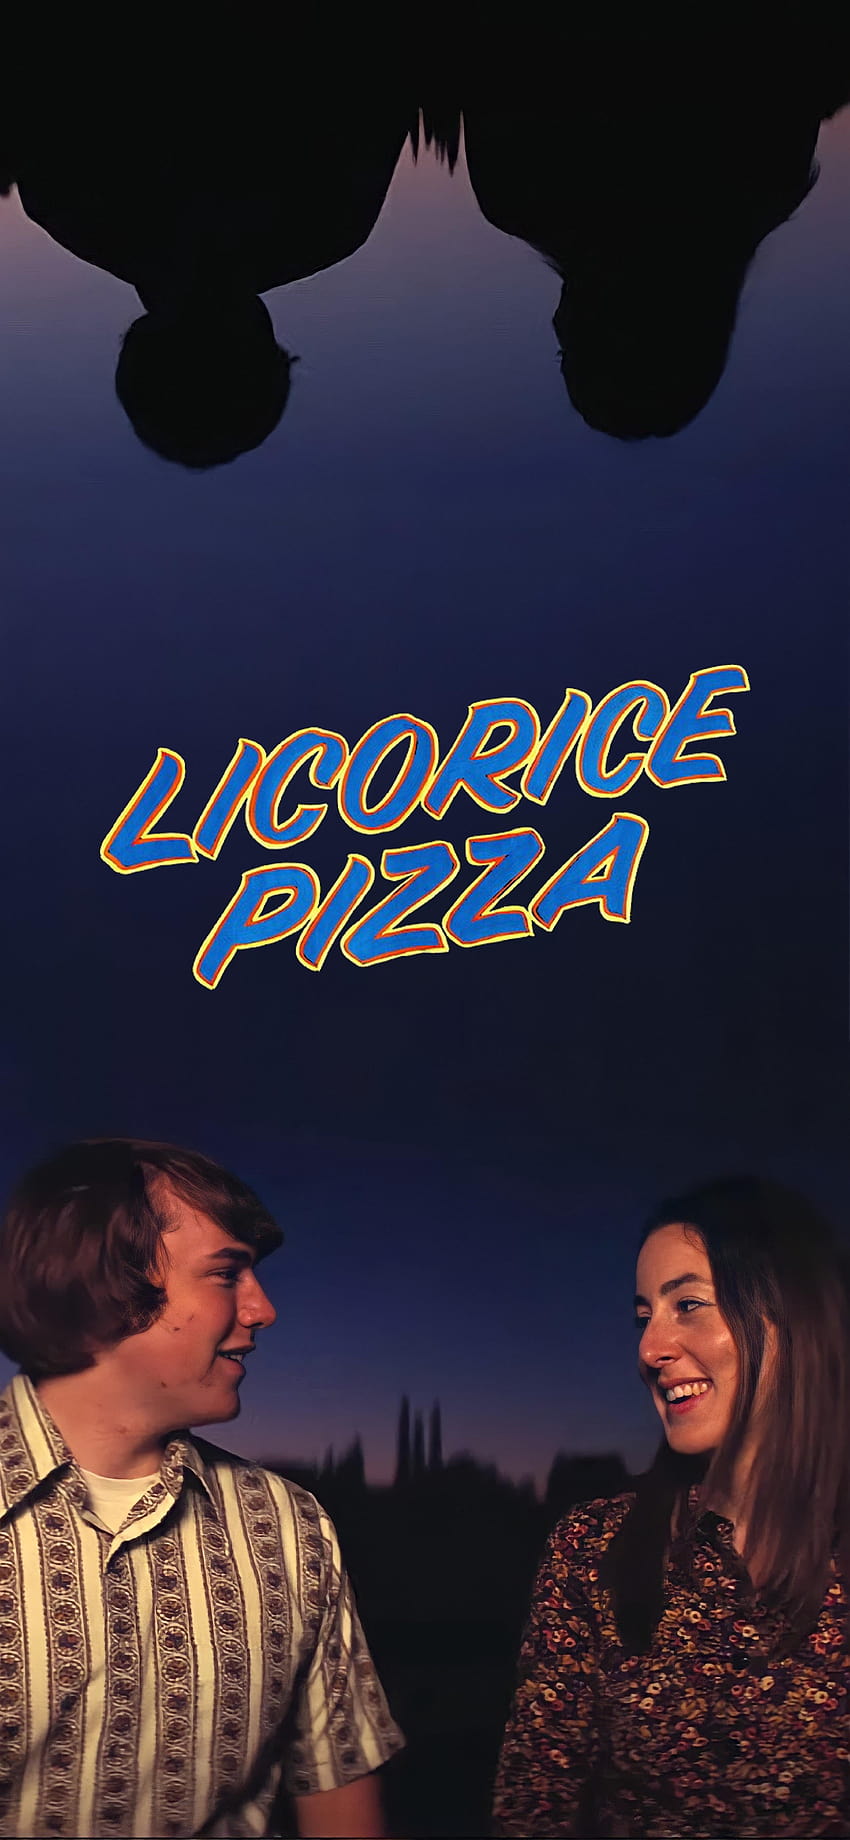 Created a Licorice Pizza phone for myself, figured I'd share it here for you guys! : r/paulthomasanderson HD phone wallpaper